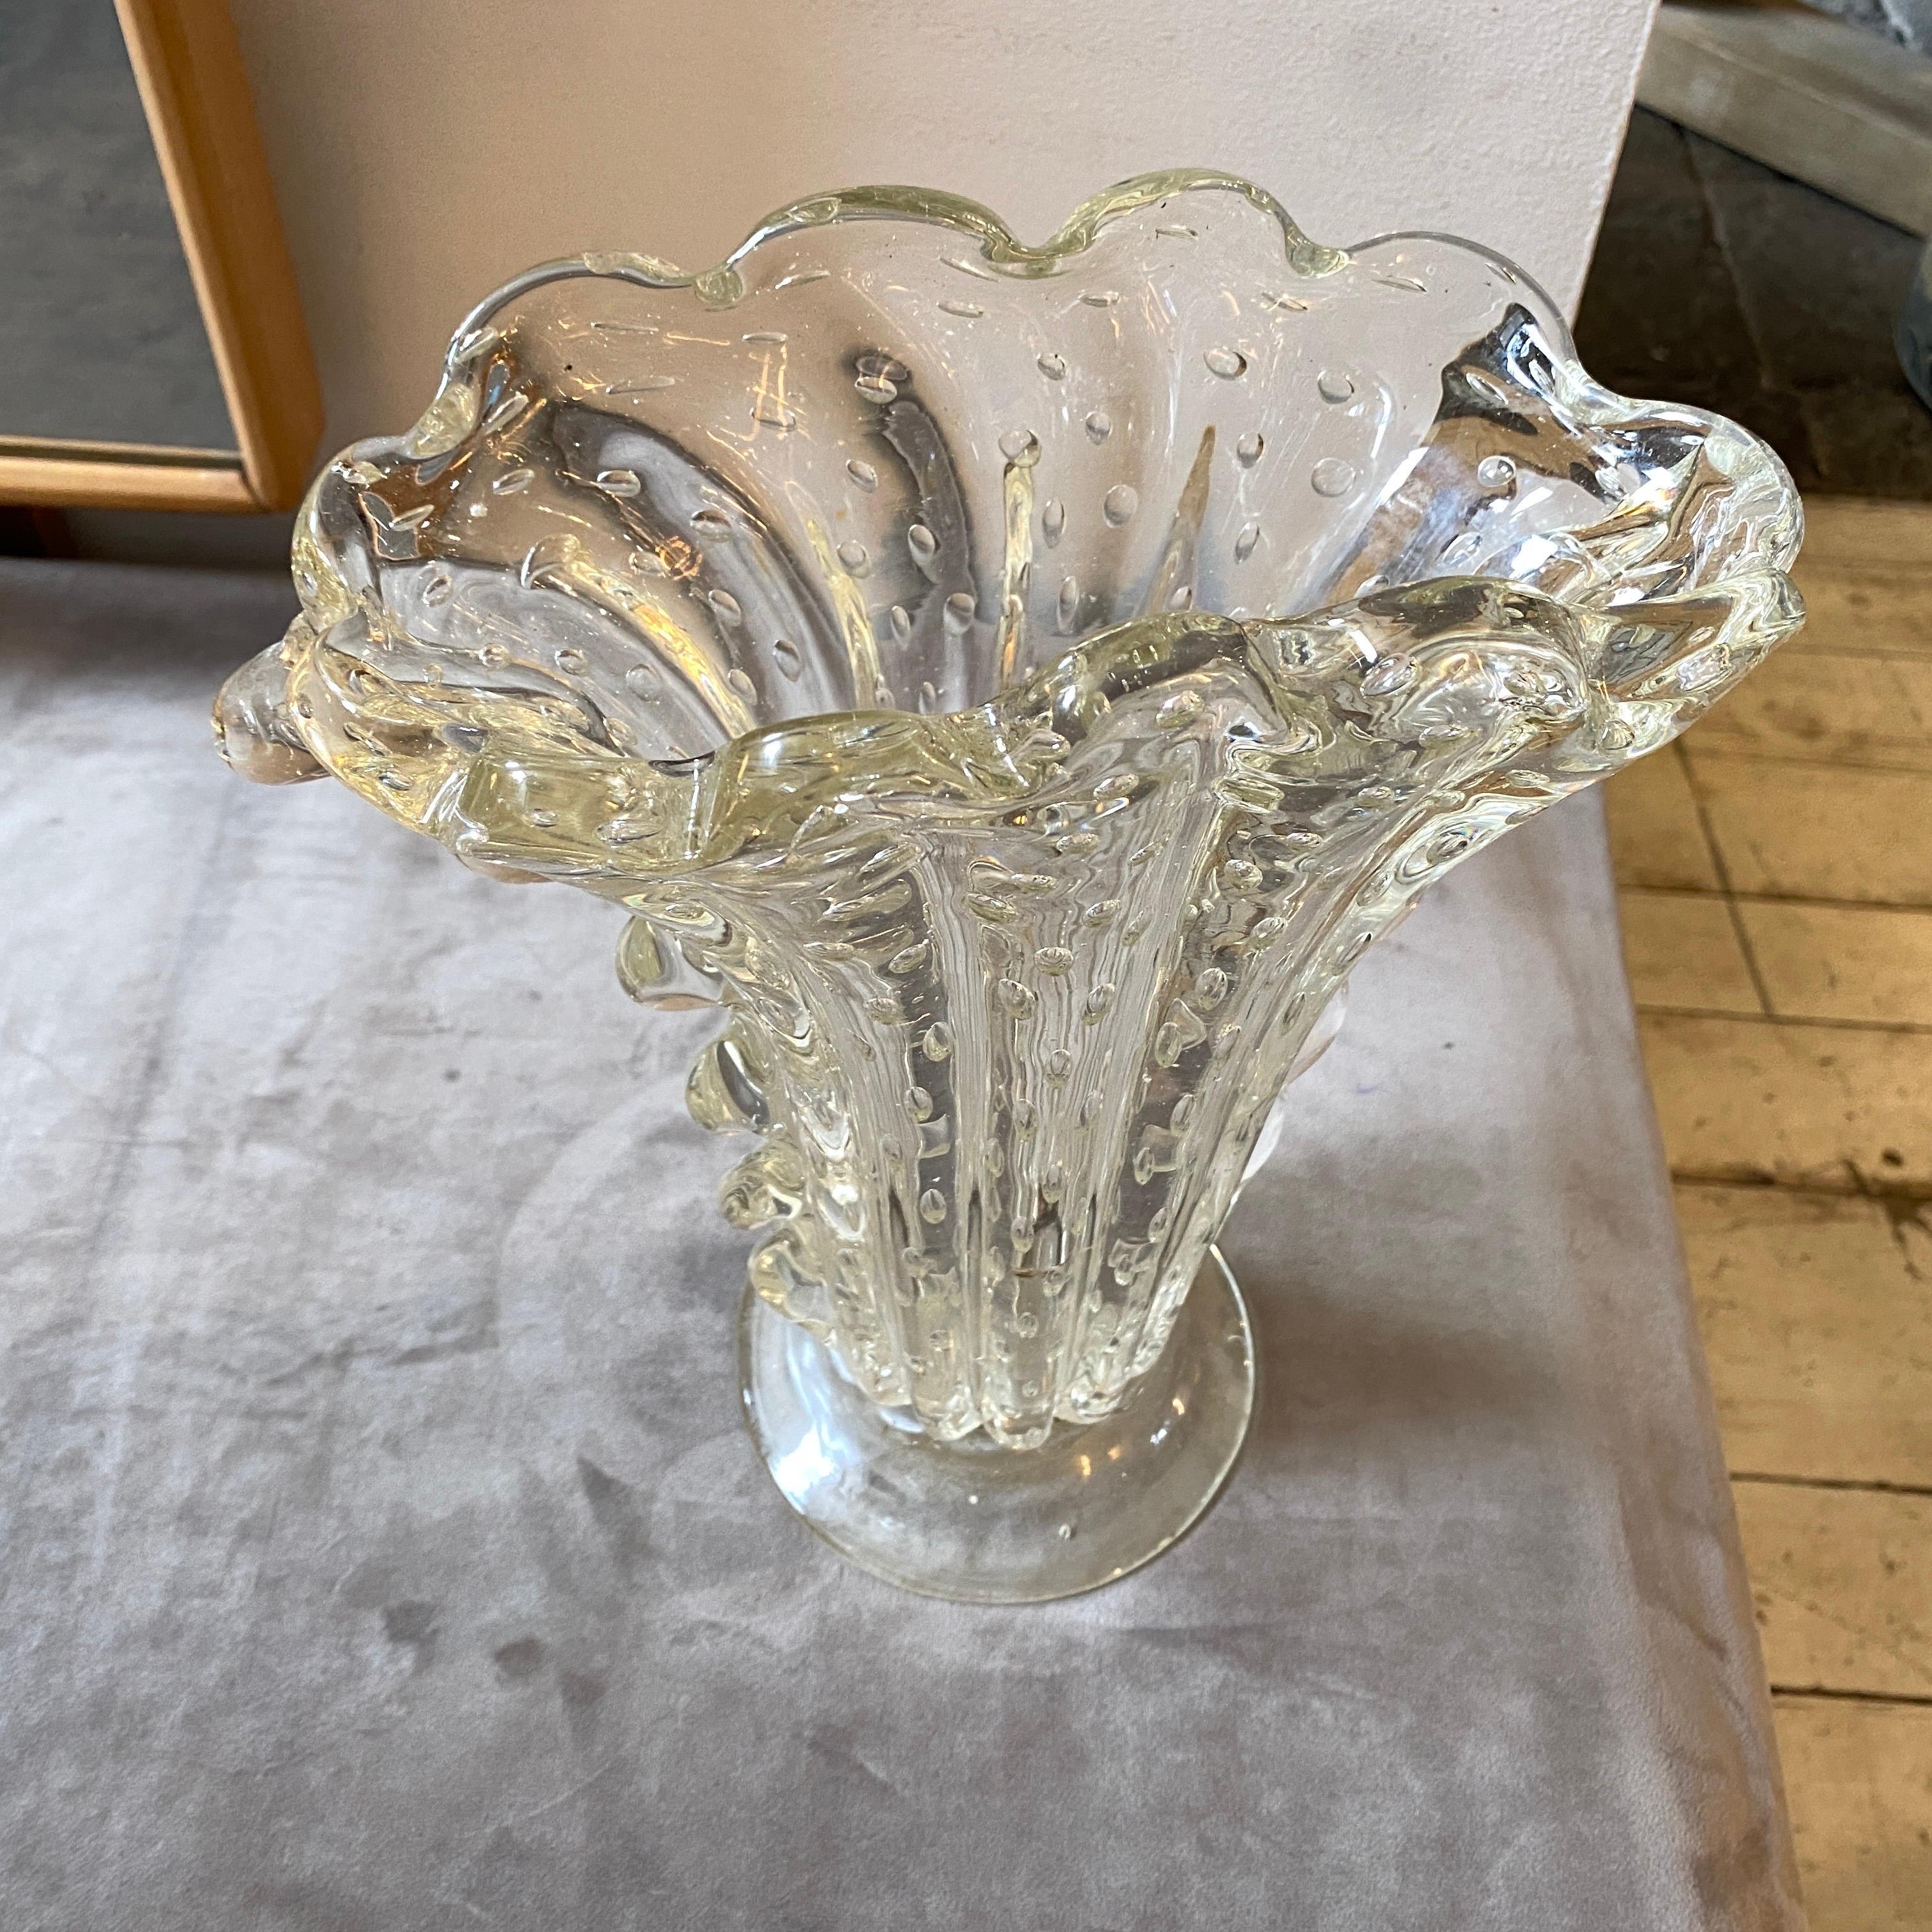 A Bullicante Murano glass vase made in Italy in the Fifties by world famous manufacturer Barovier. The vase it's in perfect conditions, its shape, color and dimensions are Barovier iconic.